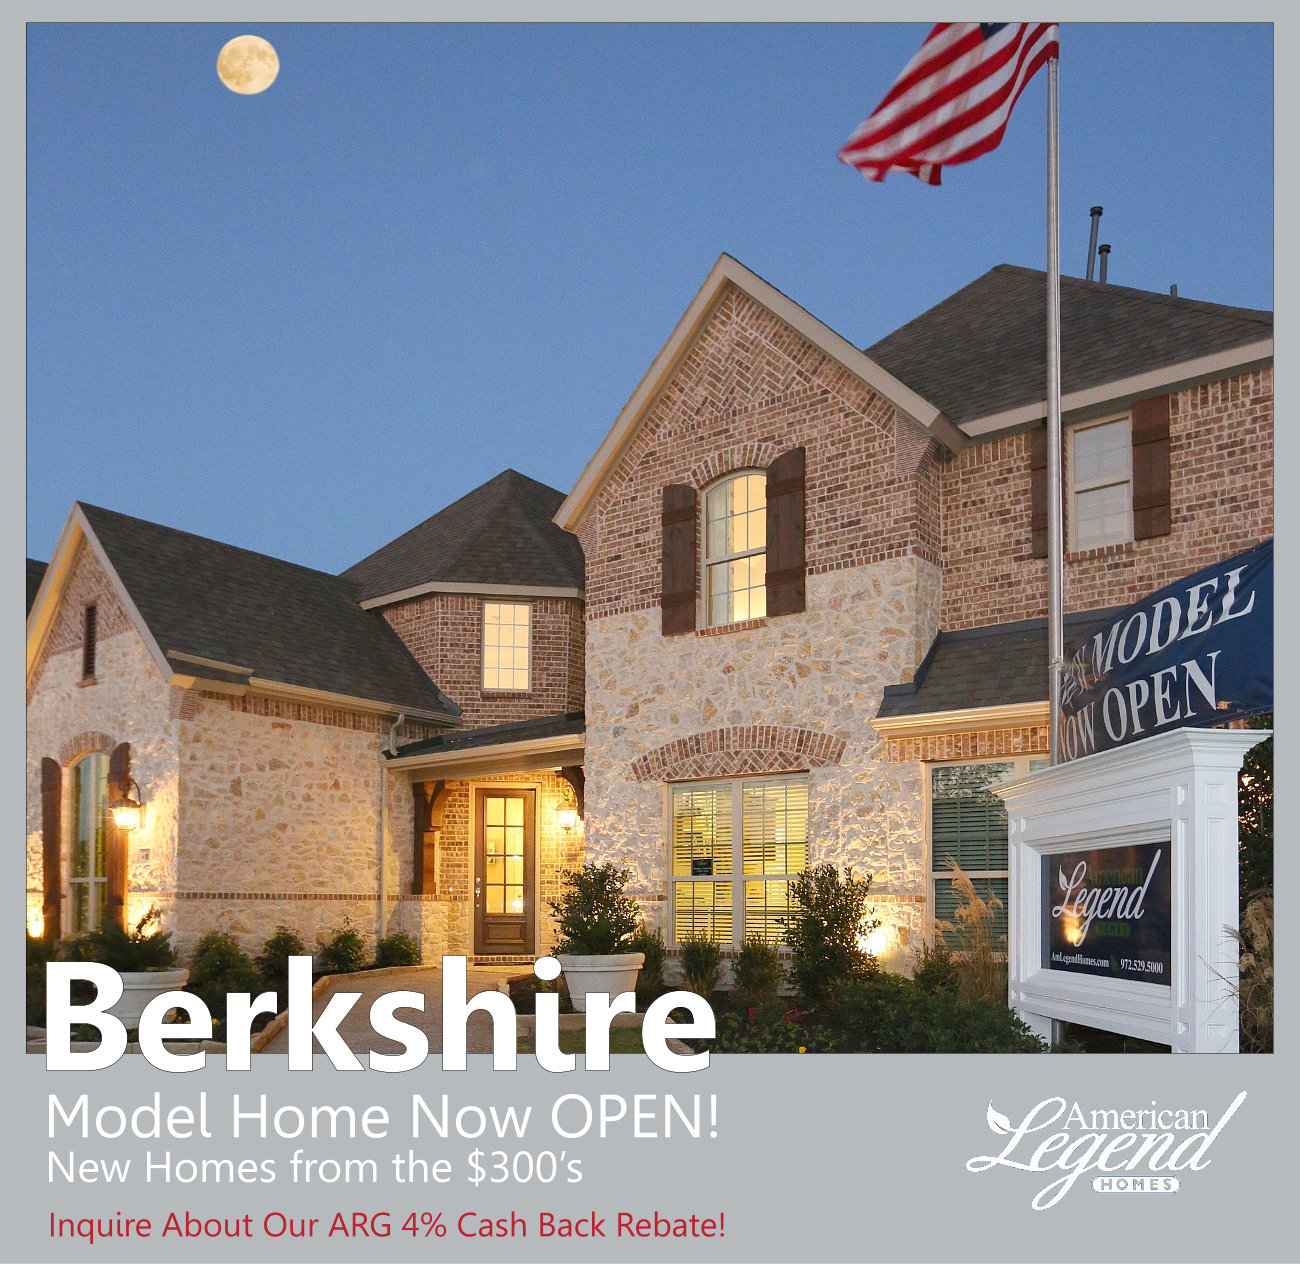 American Legend Homes Model Home in Berkshire Fort Worth is Now OPEN!